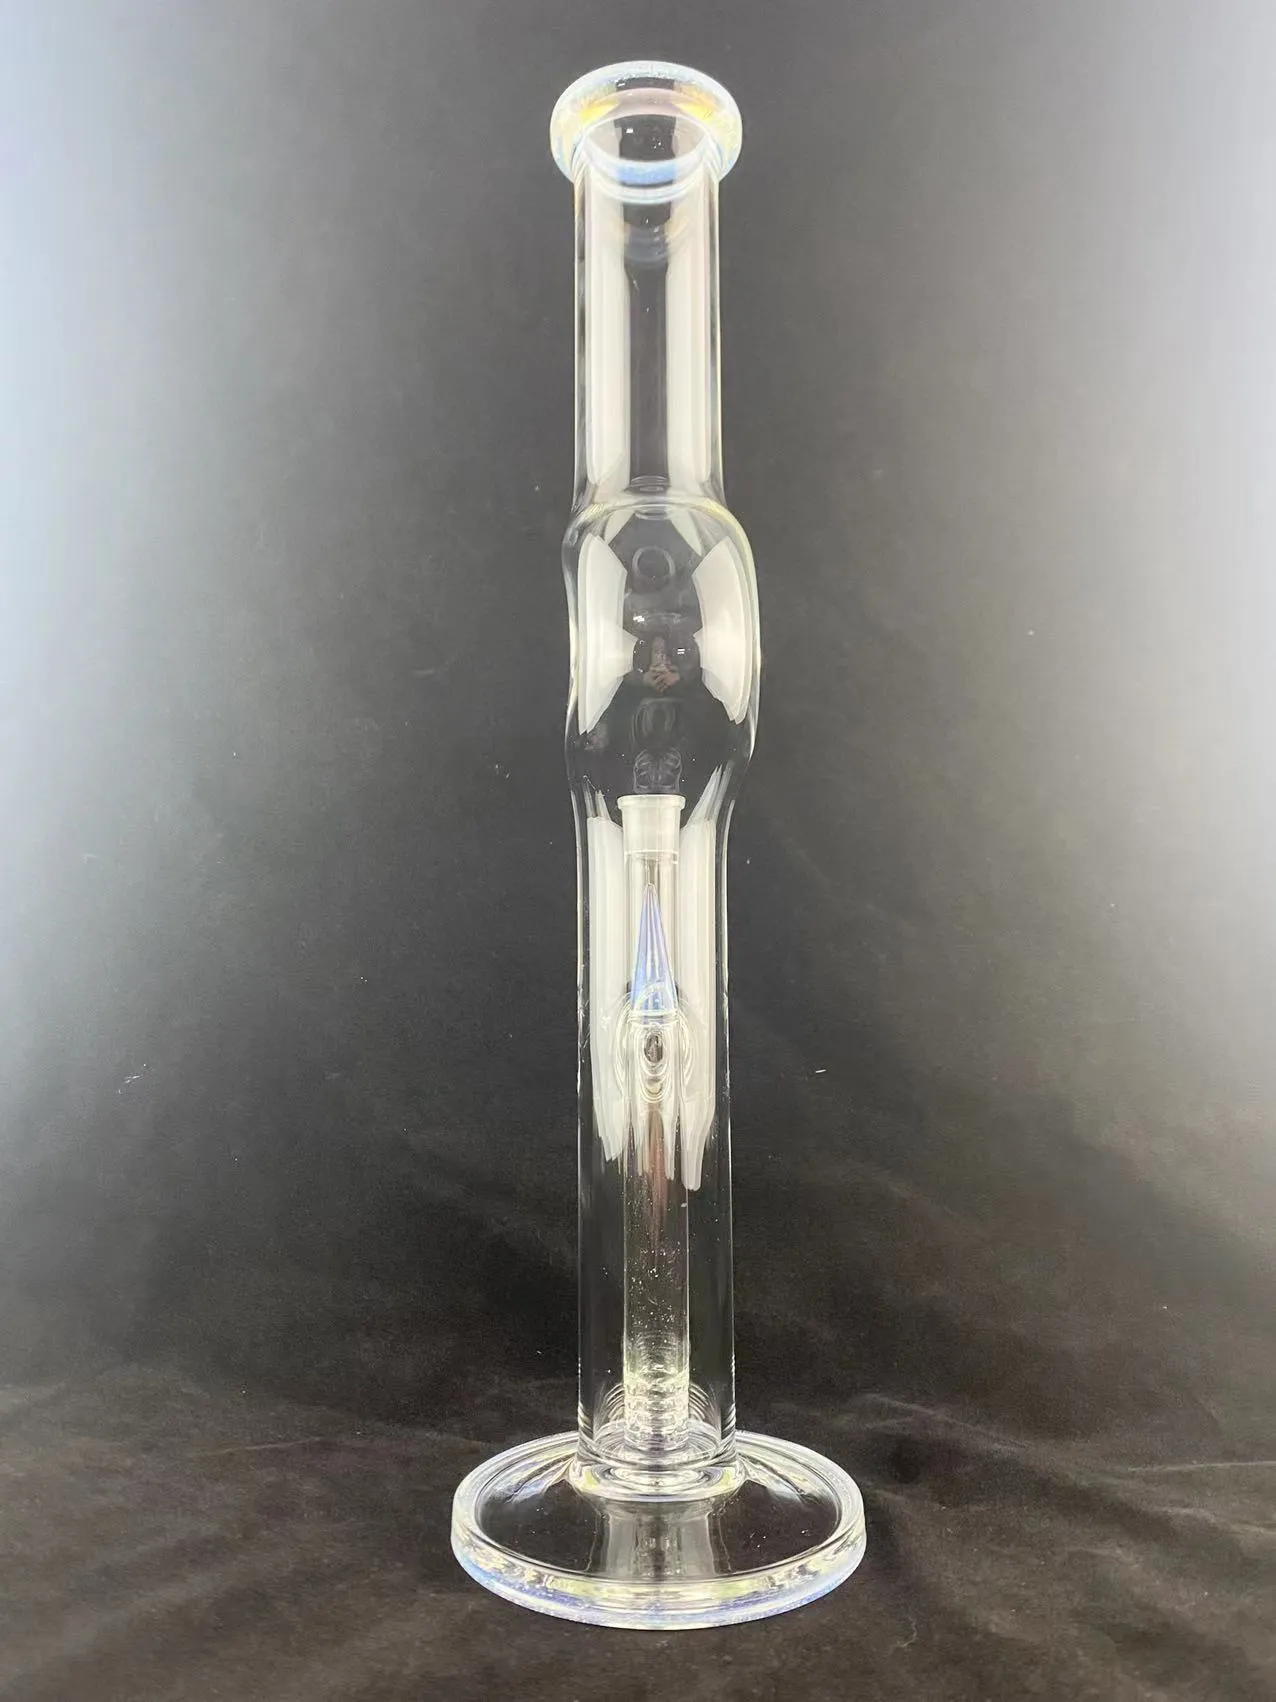 Smoking Pipesben bong secret white accents 16.5inch 18mm joint new design,function well.Welcome to order